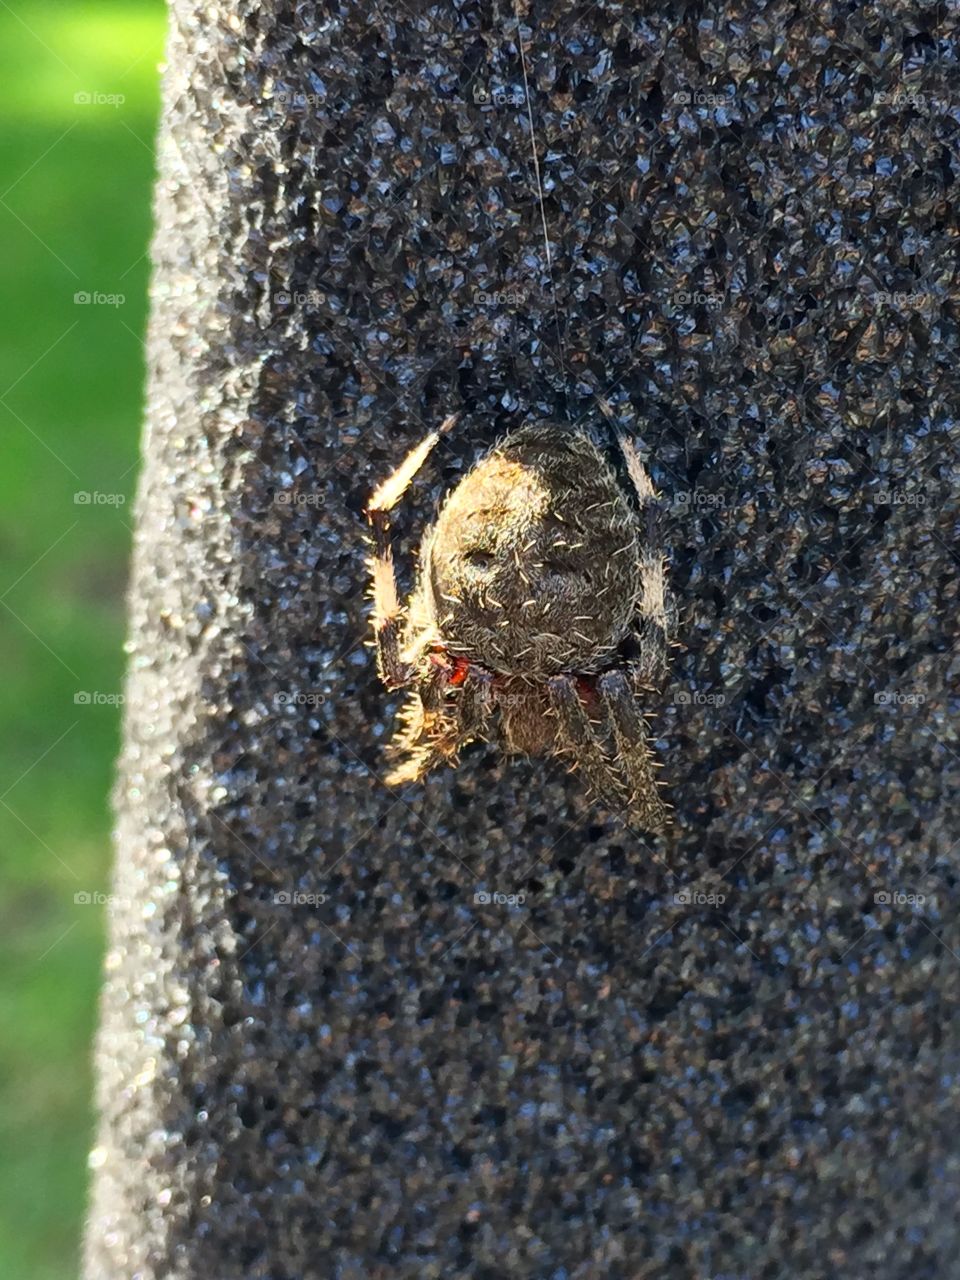 Unknown Spider part 2. Found in my backyard. I might have to move.